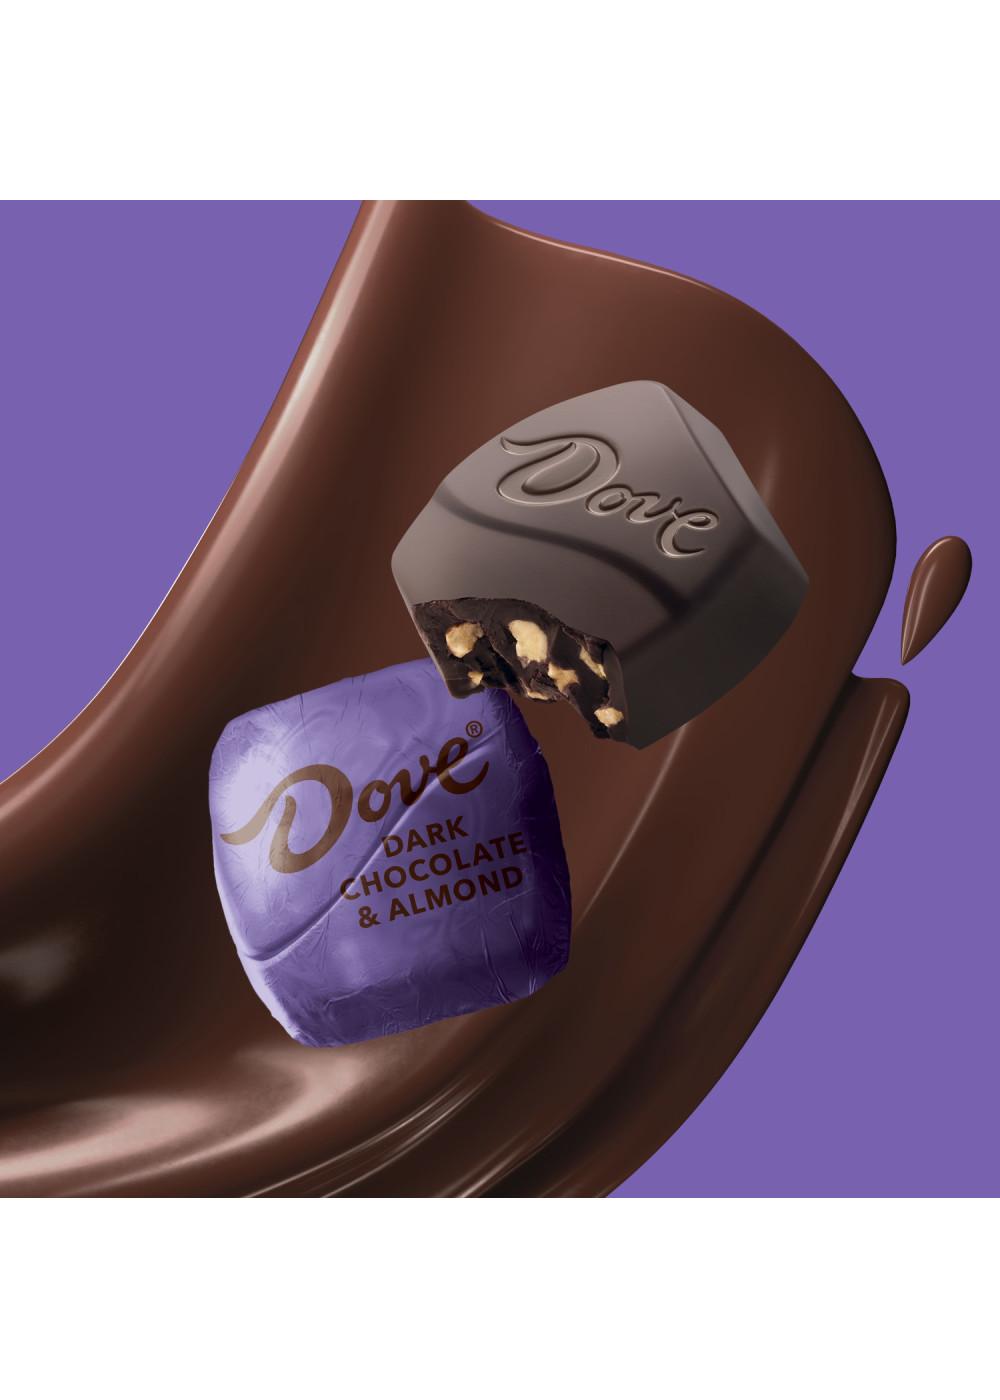 Dove Promises Dark Chocolate & Almond Candy - Large Bag; image 2 of 7